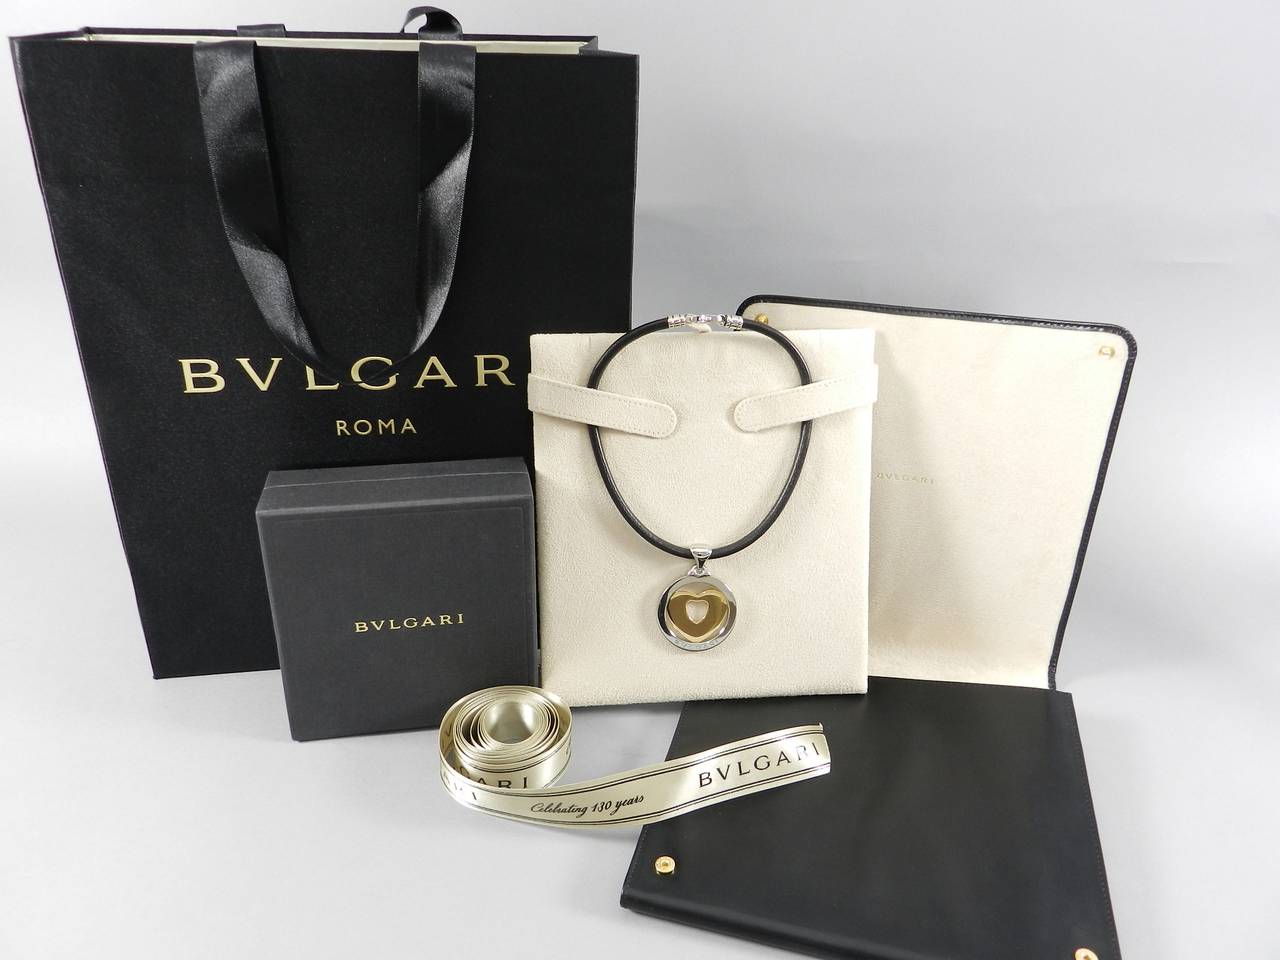 Bvlgari tondo heart necklace. 18k gold, stainless steel, leather cord, and lobster clasp. Comes with all original packaging. Excellent condition. Necklace is 15